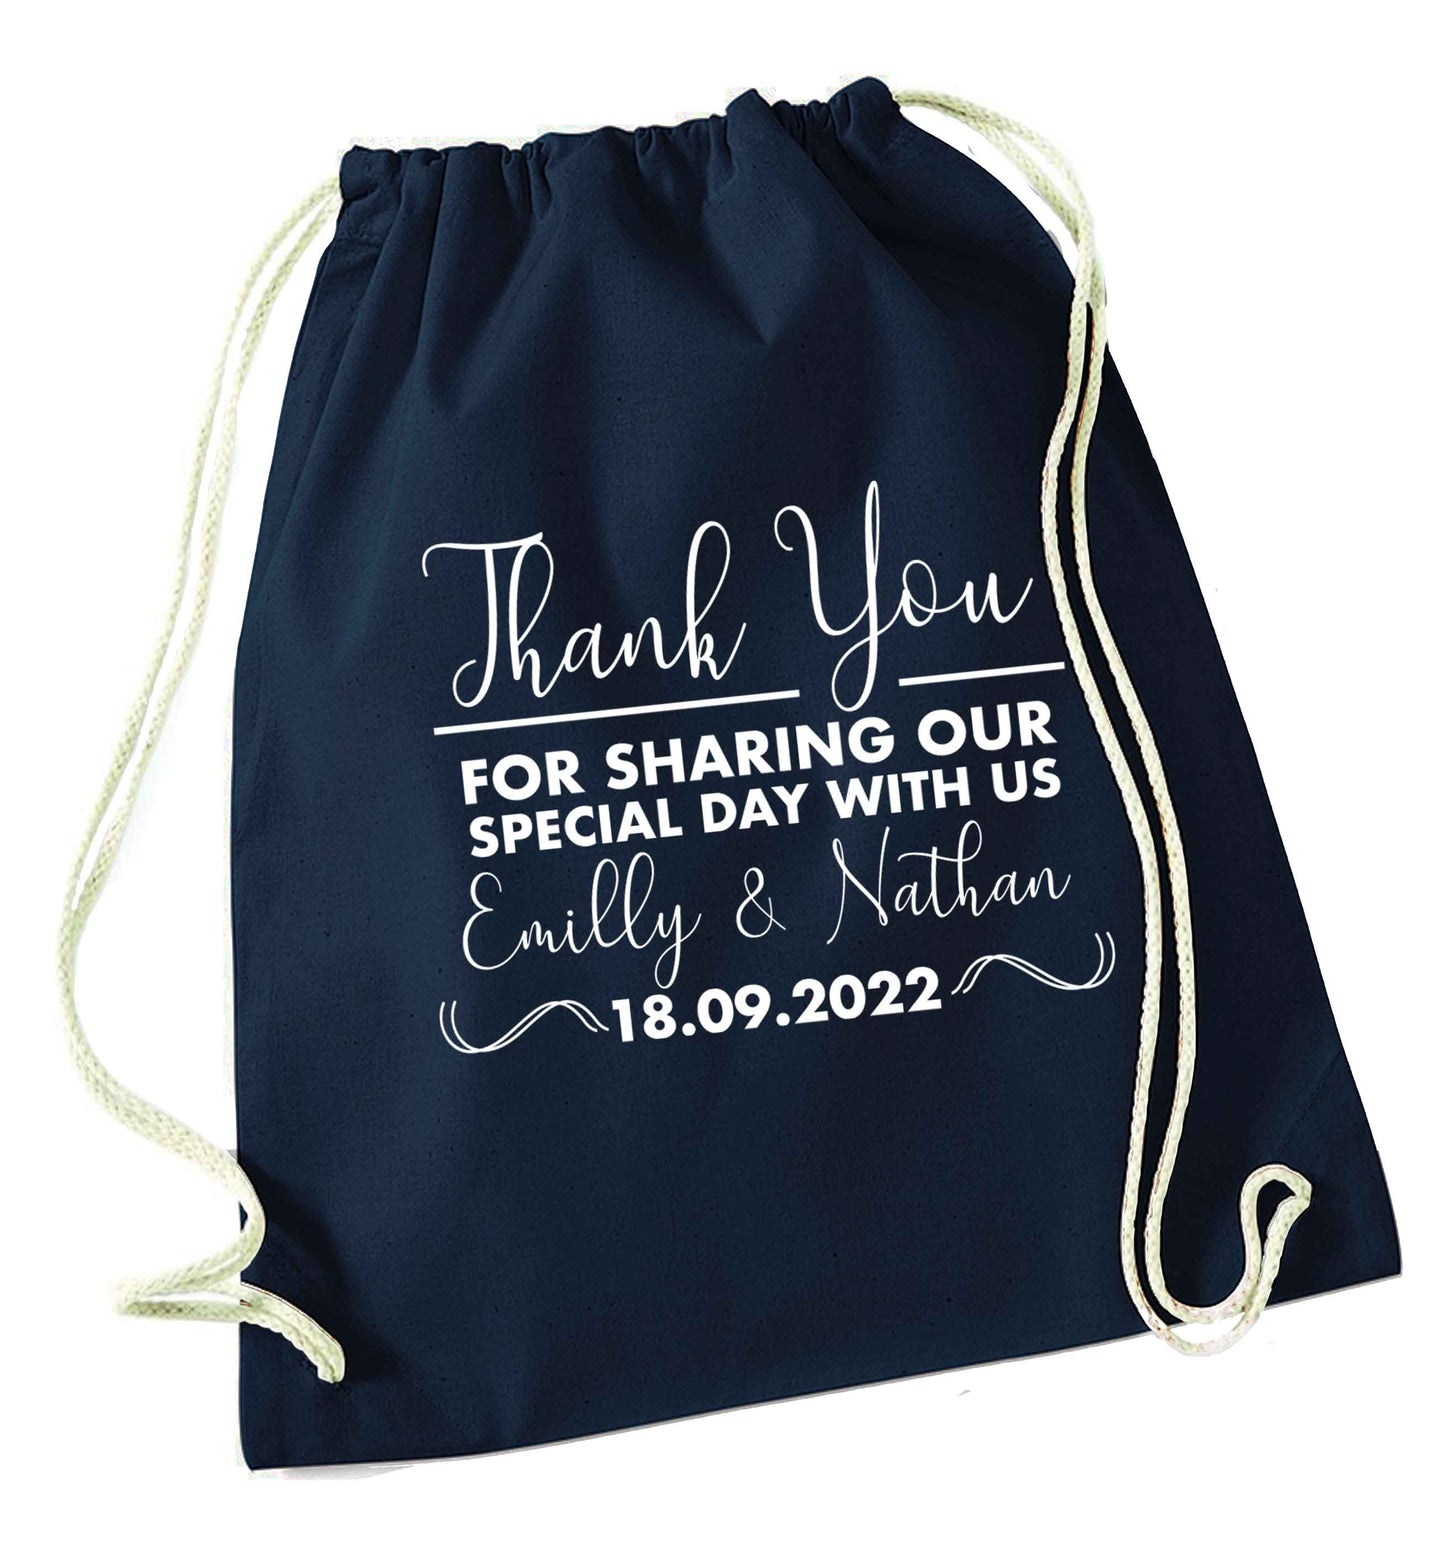 Gorgeous personalised and customisable wedding favour gifts! navy drawstring bag